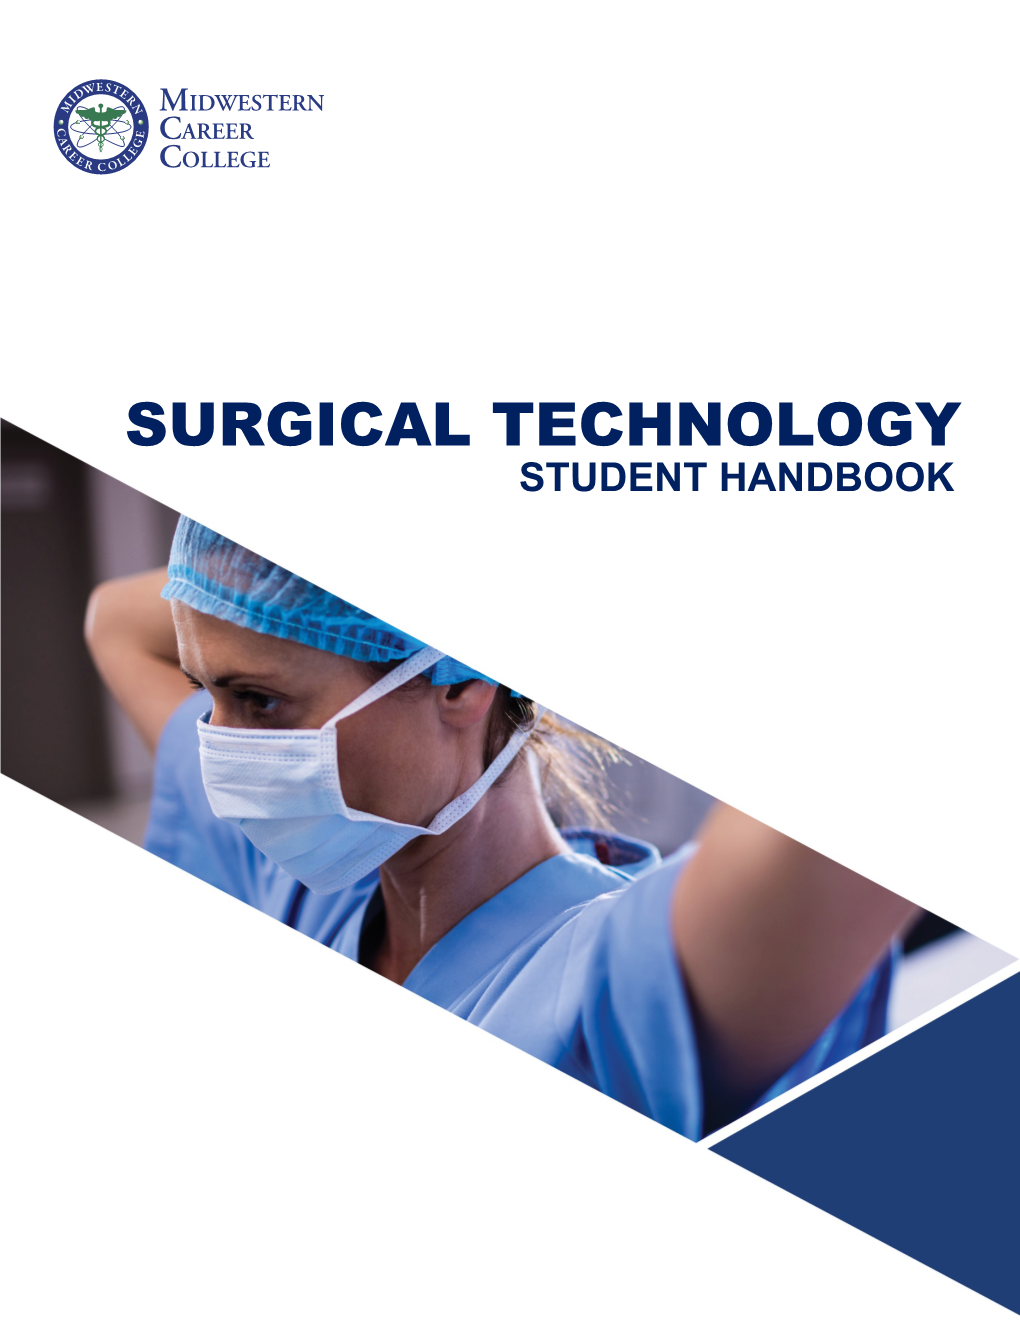 Surgical Technology Handbook Midwestern Career College